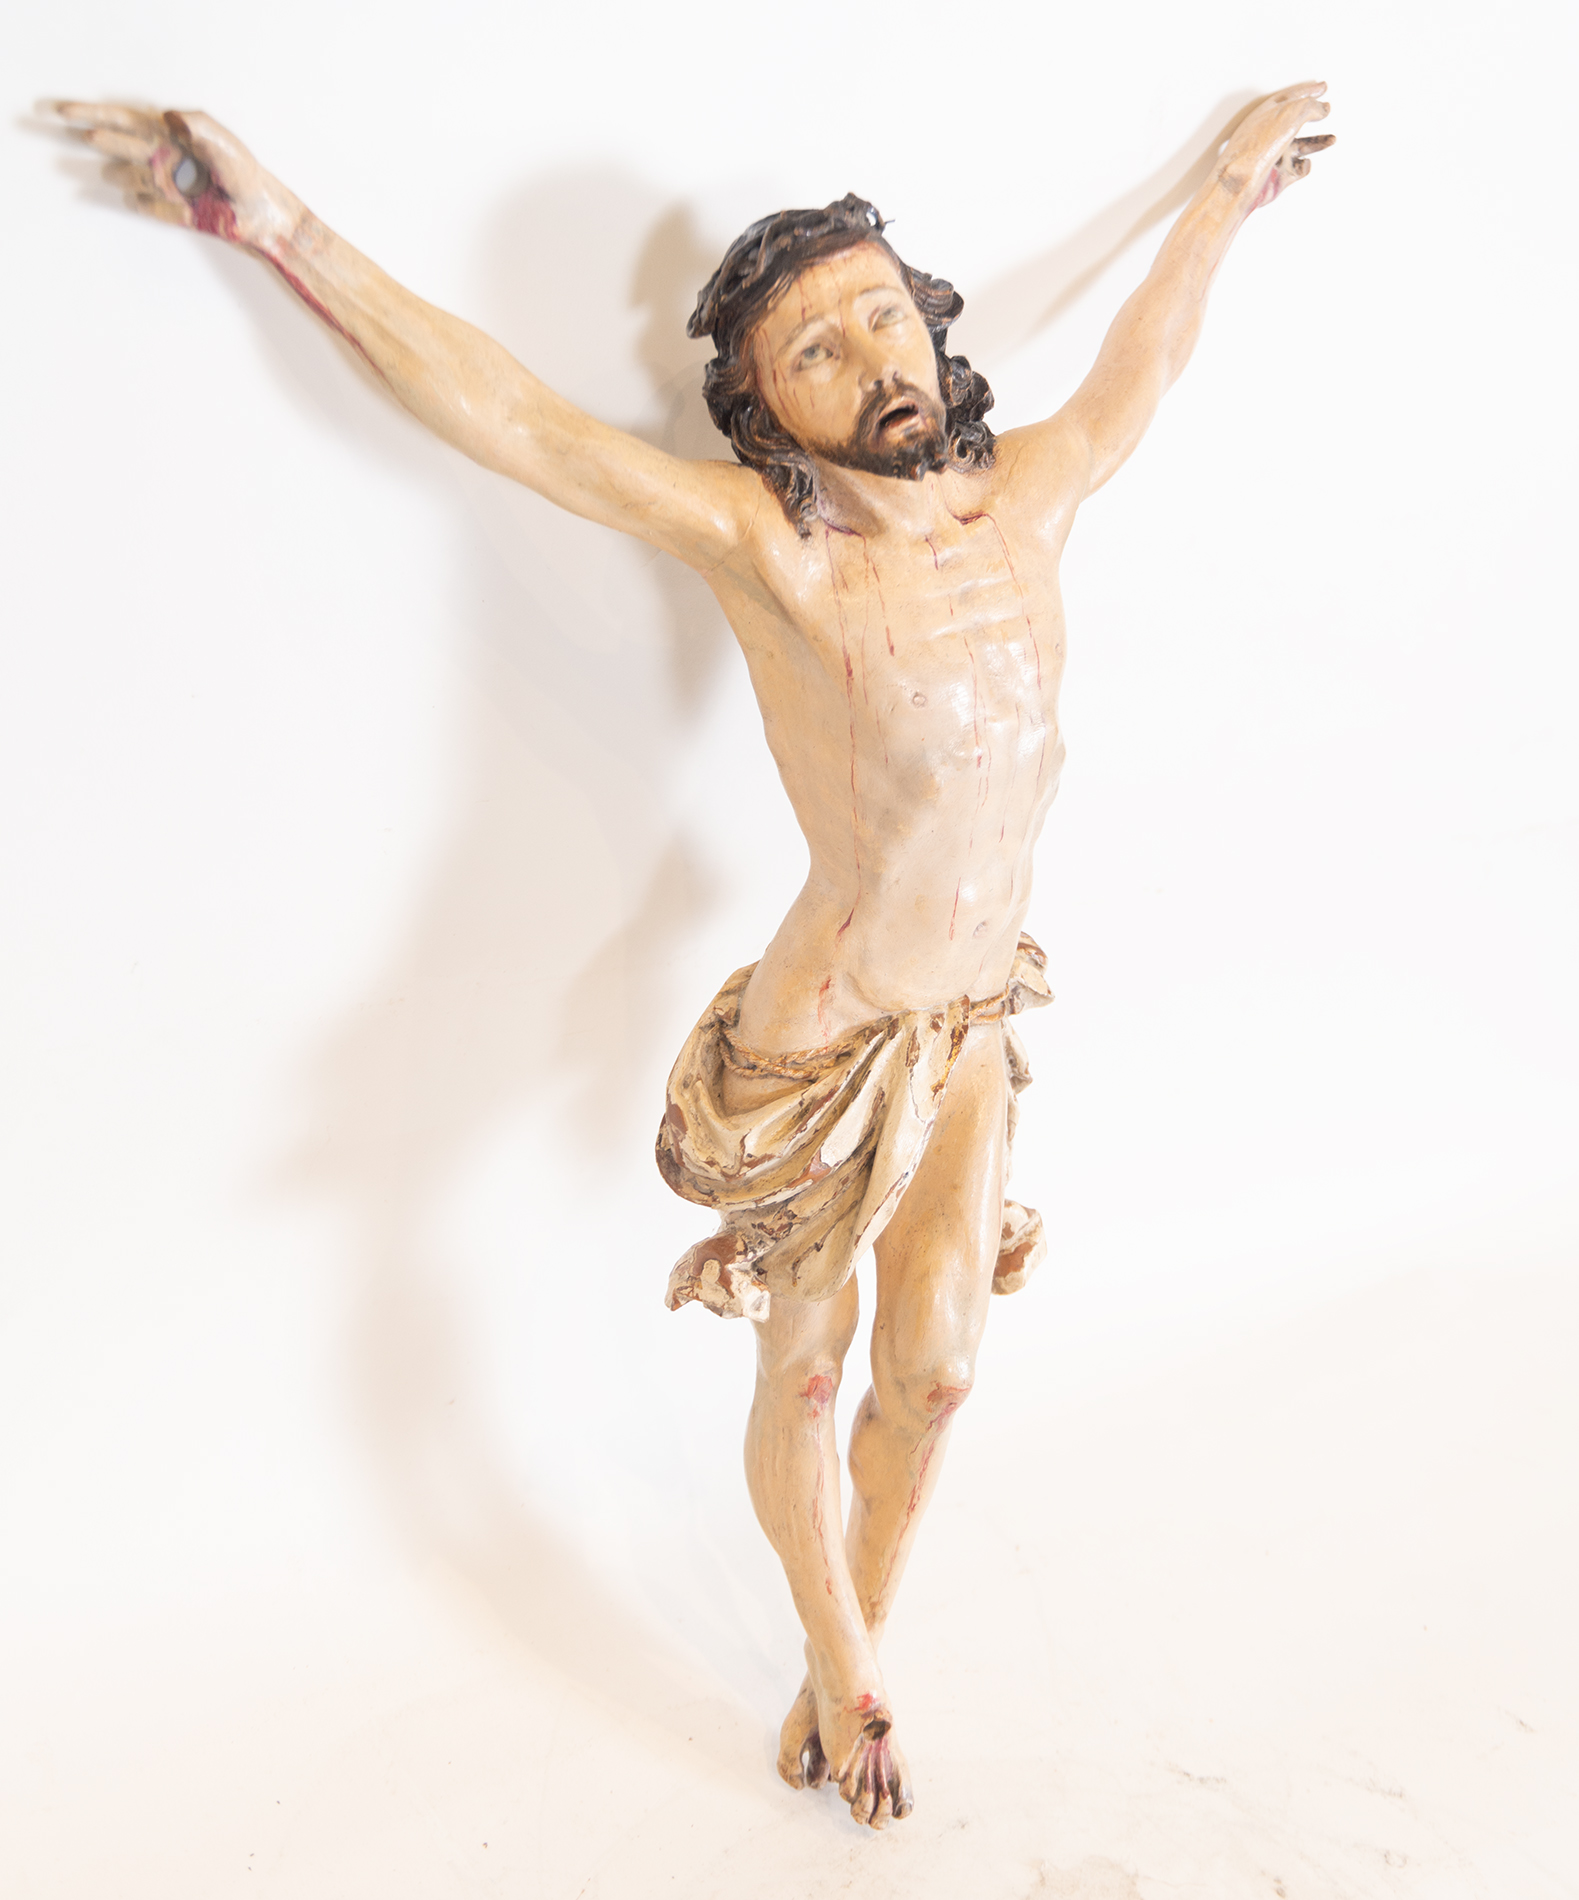 Large Christ in Wood, Italian school of the 17th century